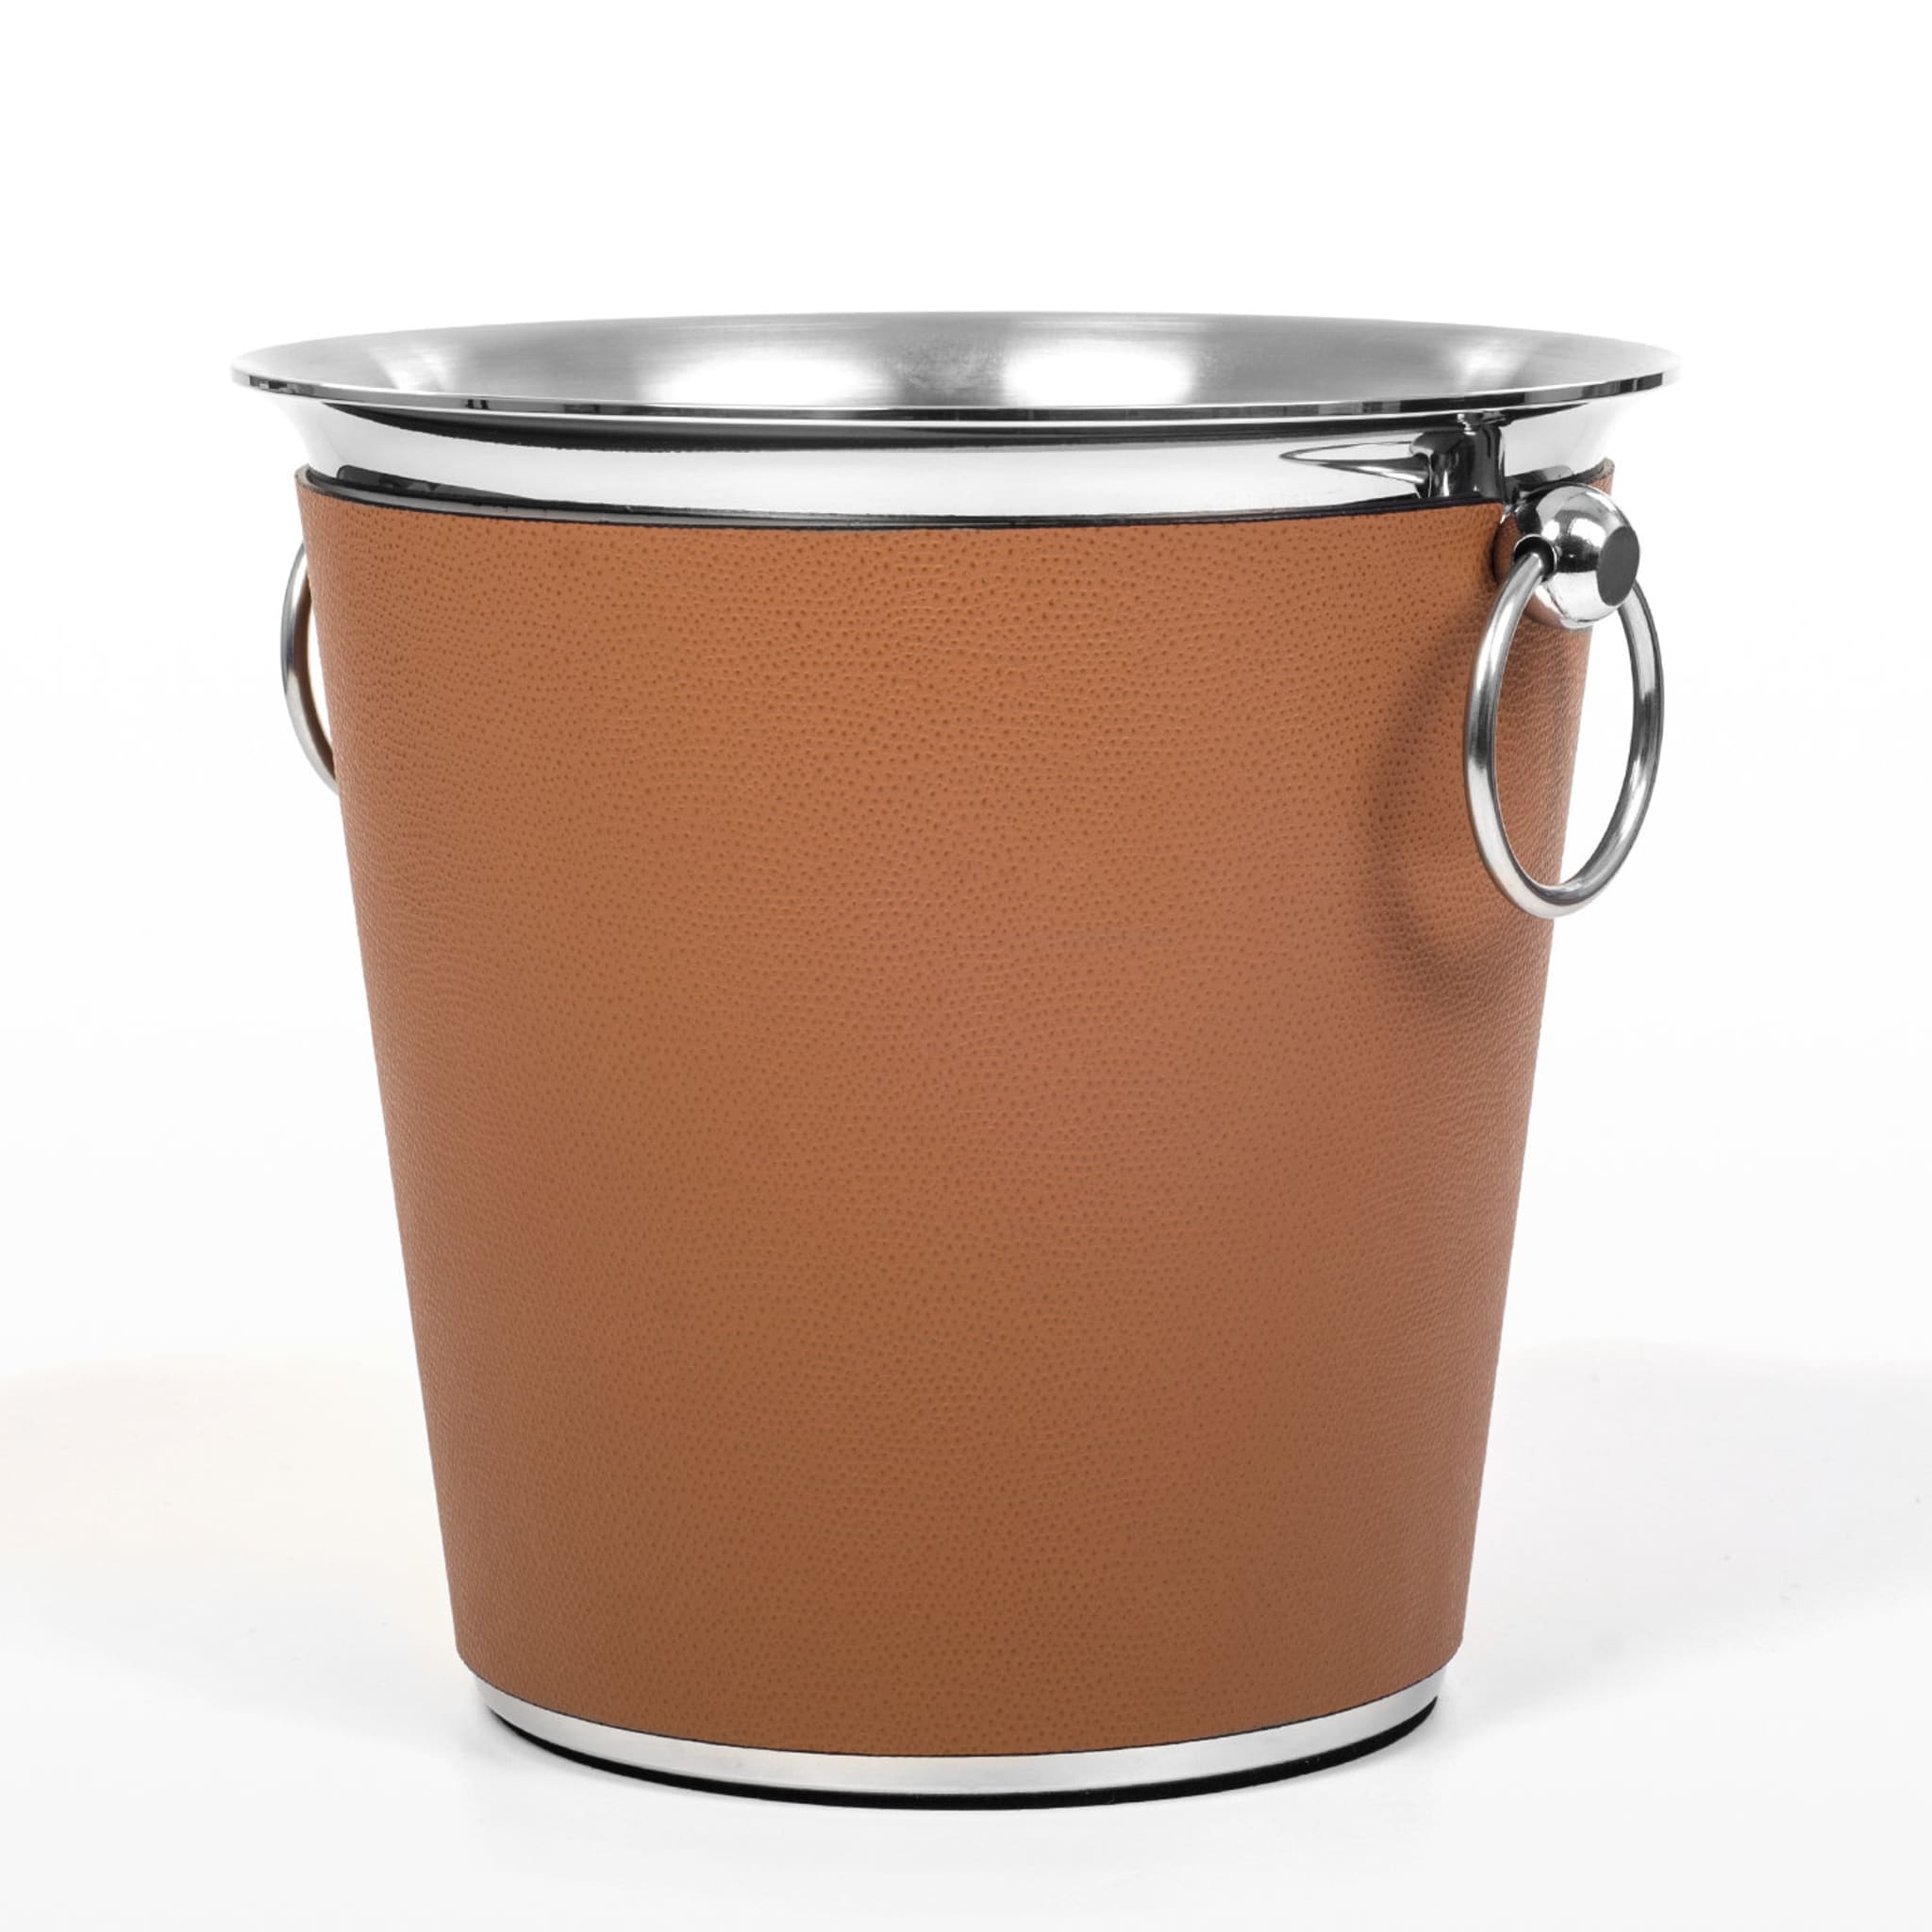 Camel Leather Champagne Cooler - Alternative view 1